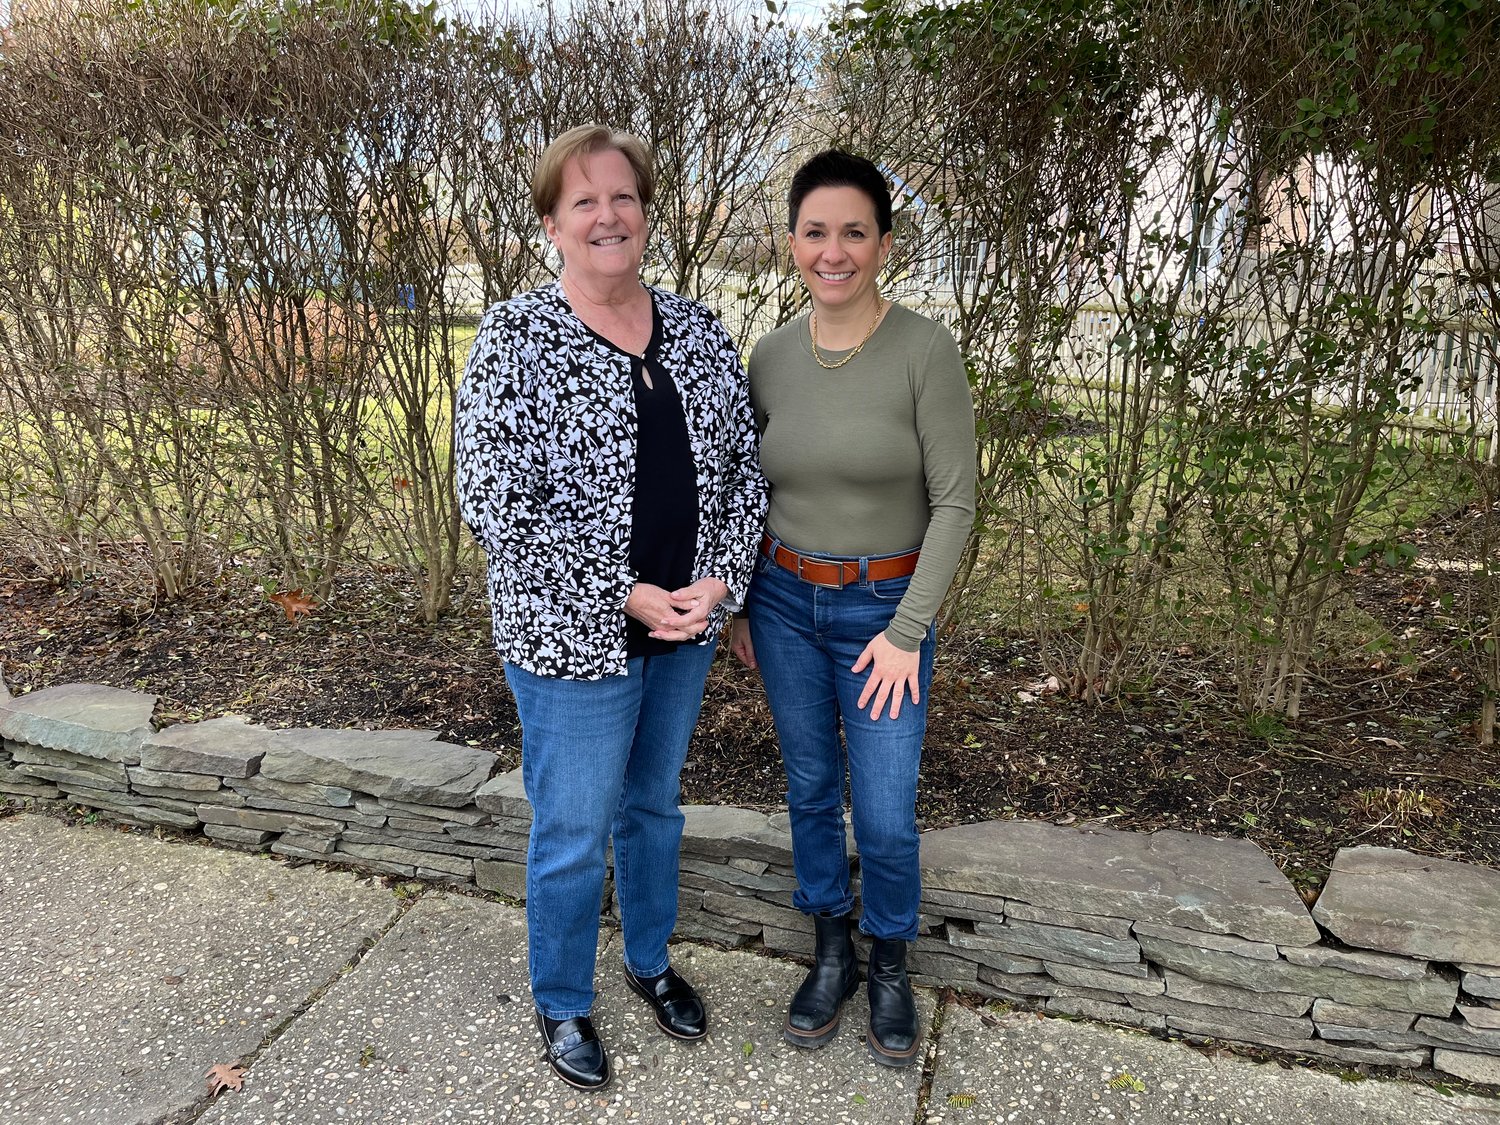 Judy Phelps, left, and Sarah Beaudin started their new positions as village treasurer and clerk, respectively, on Jan. 21.